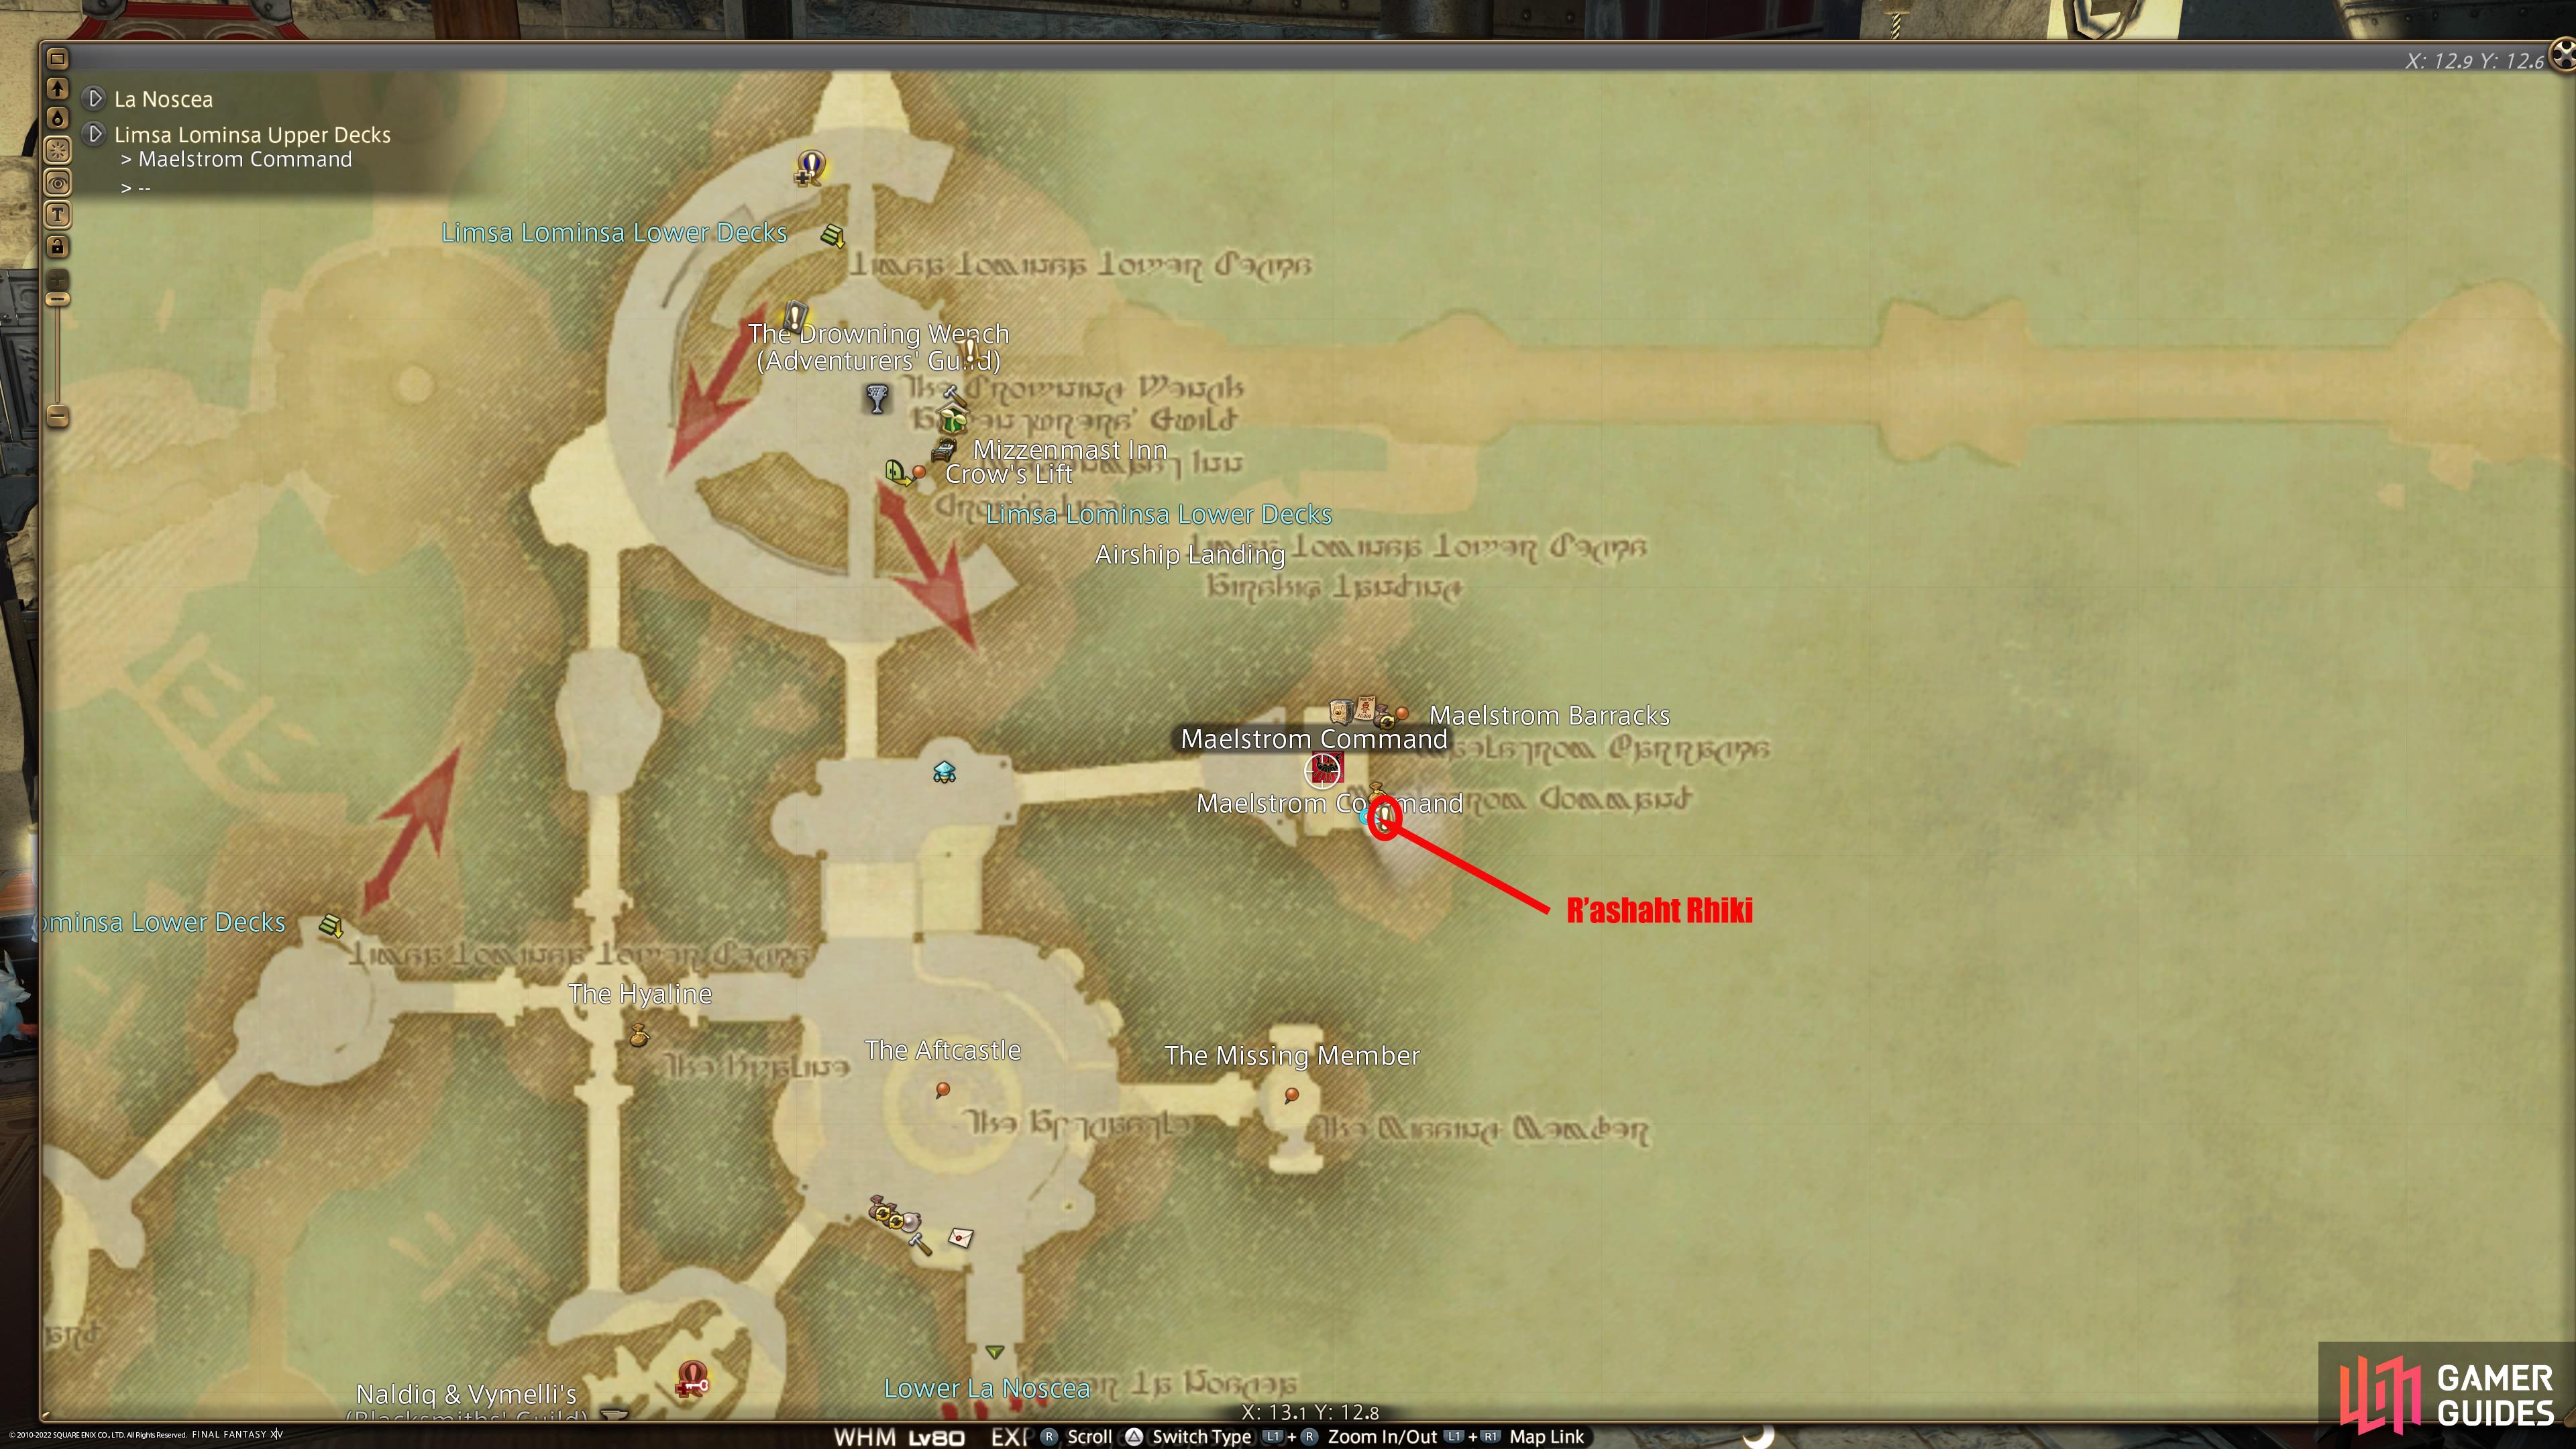 You can find the Maelstrom Command near The Aftcastle mini-aetheryte in Limsa Lominsa.